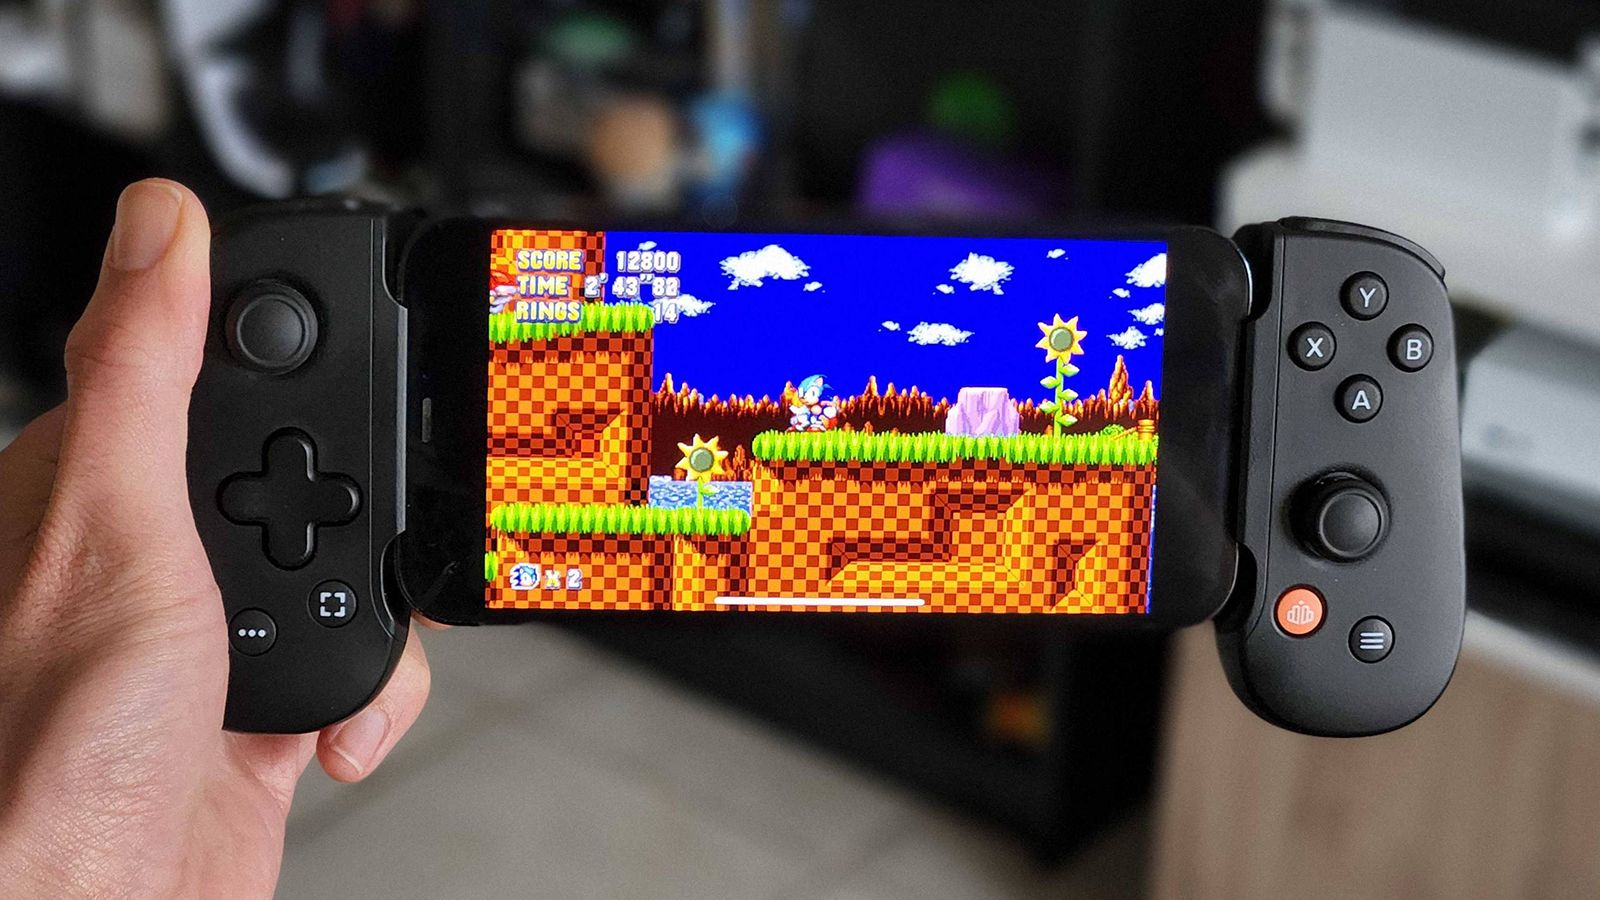 Backbone One Hands on: Is This the Best Mobile Gaming Controller? 